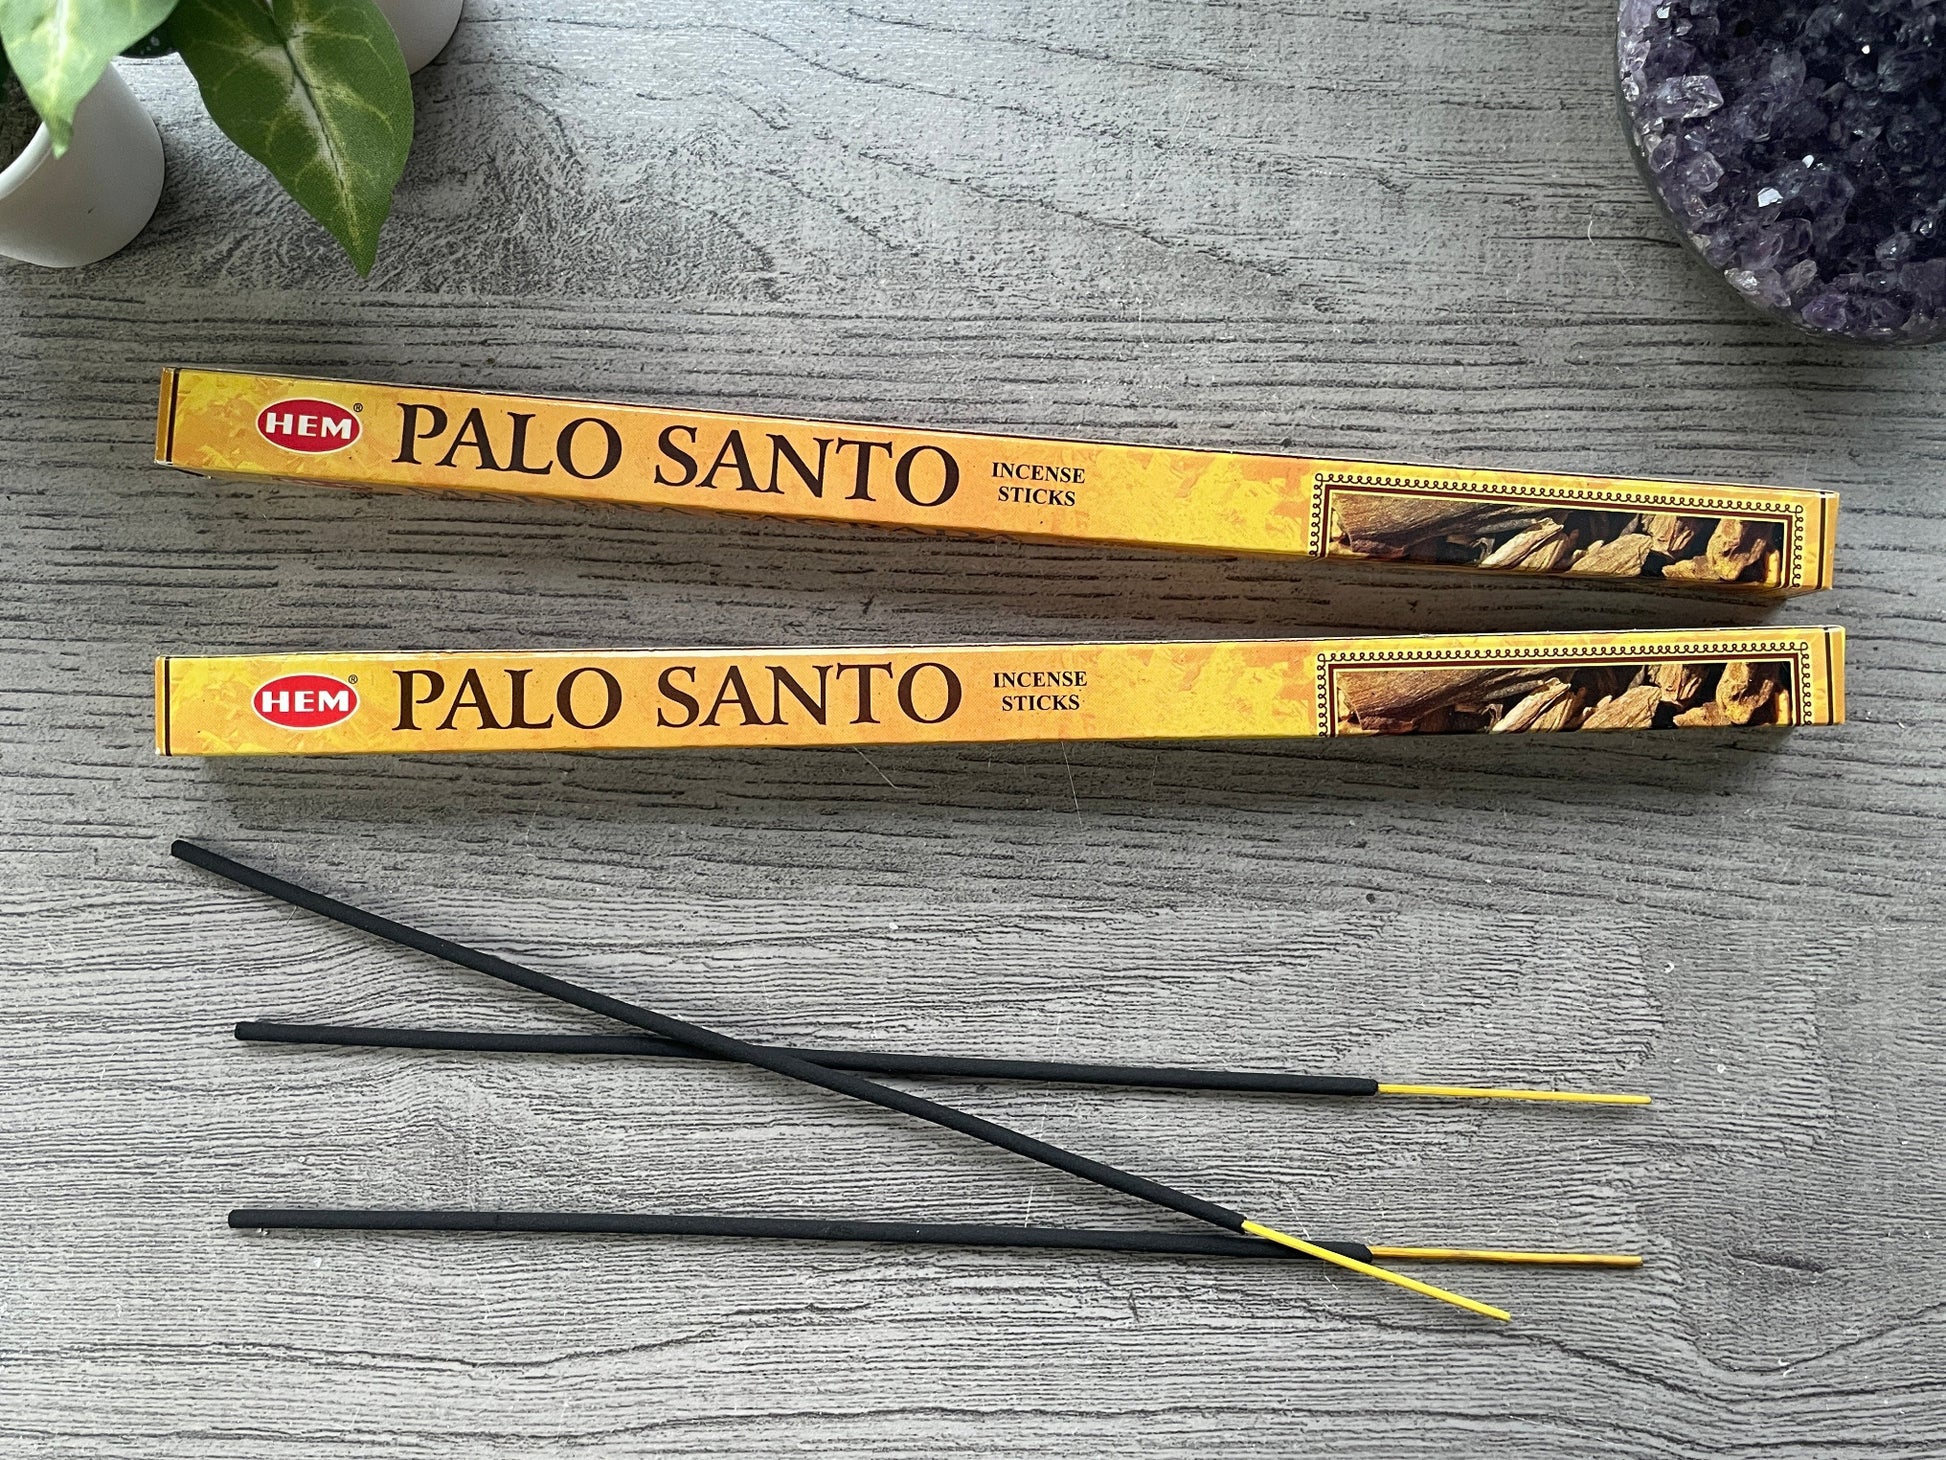 Pictured is a box of palo santo incense.